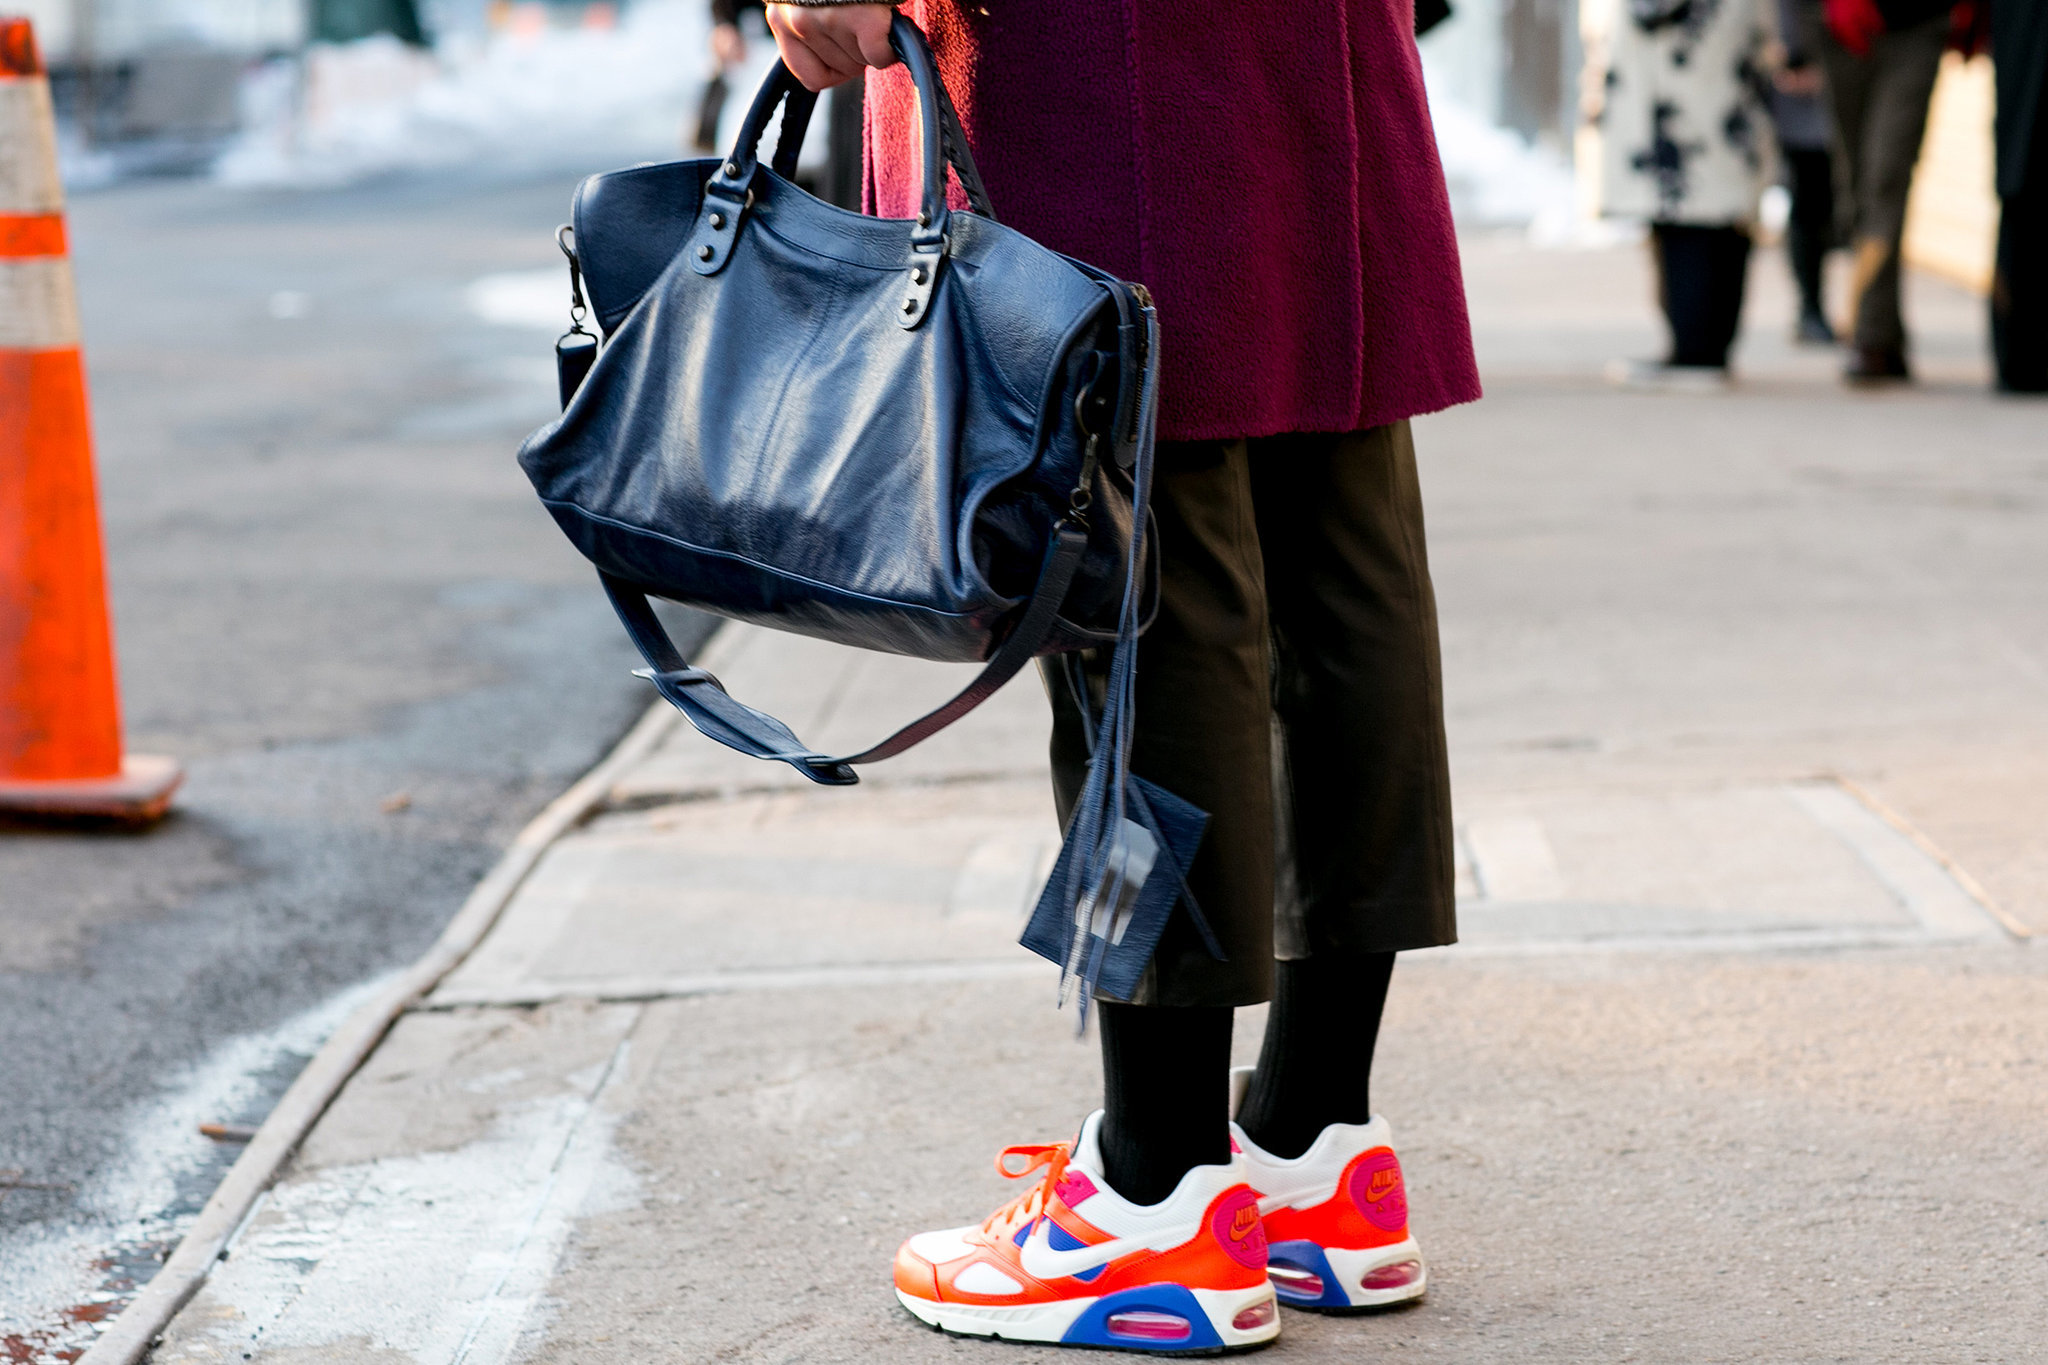 Who knew how well a Balenciaga bag went with Nikes?!
